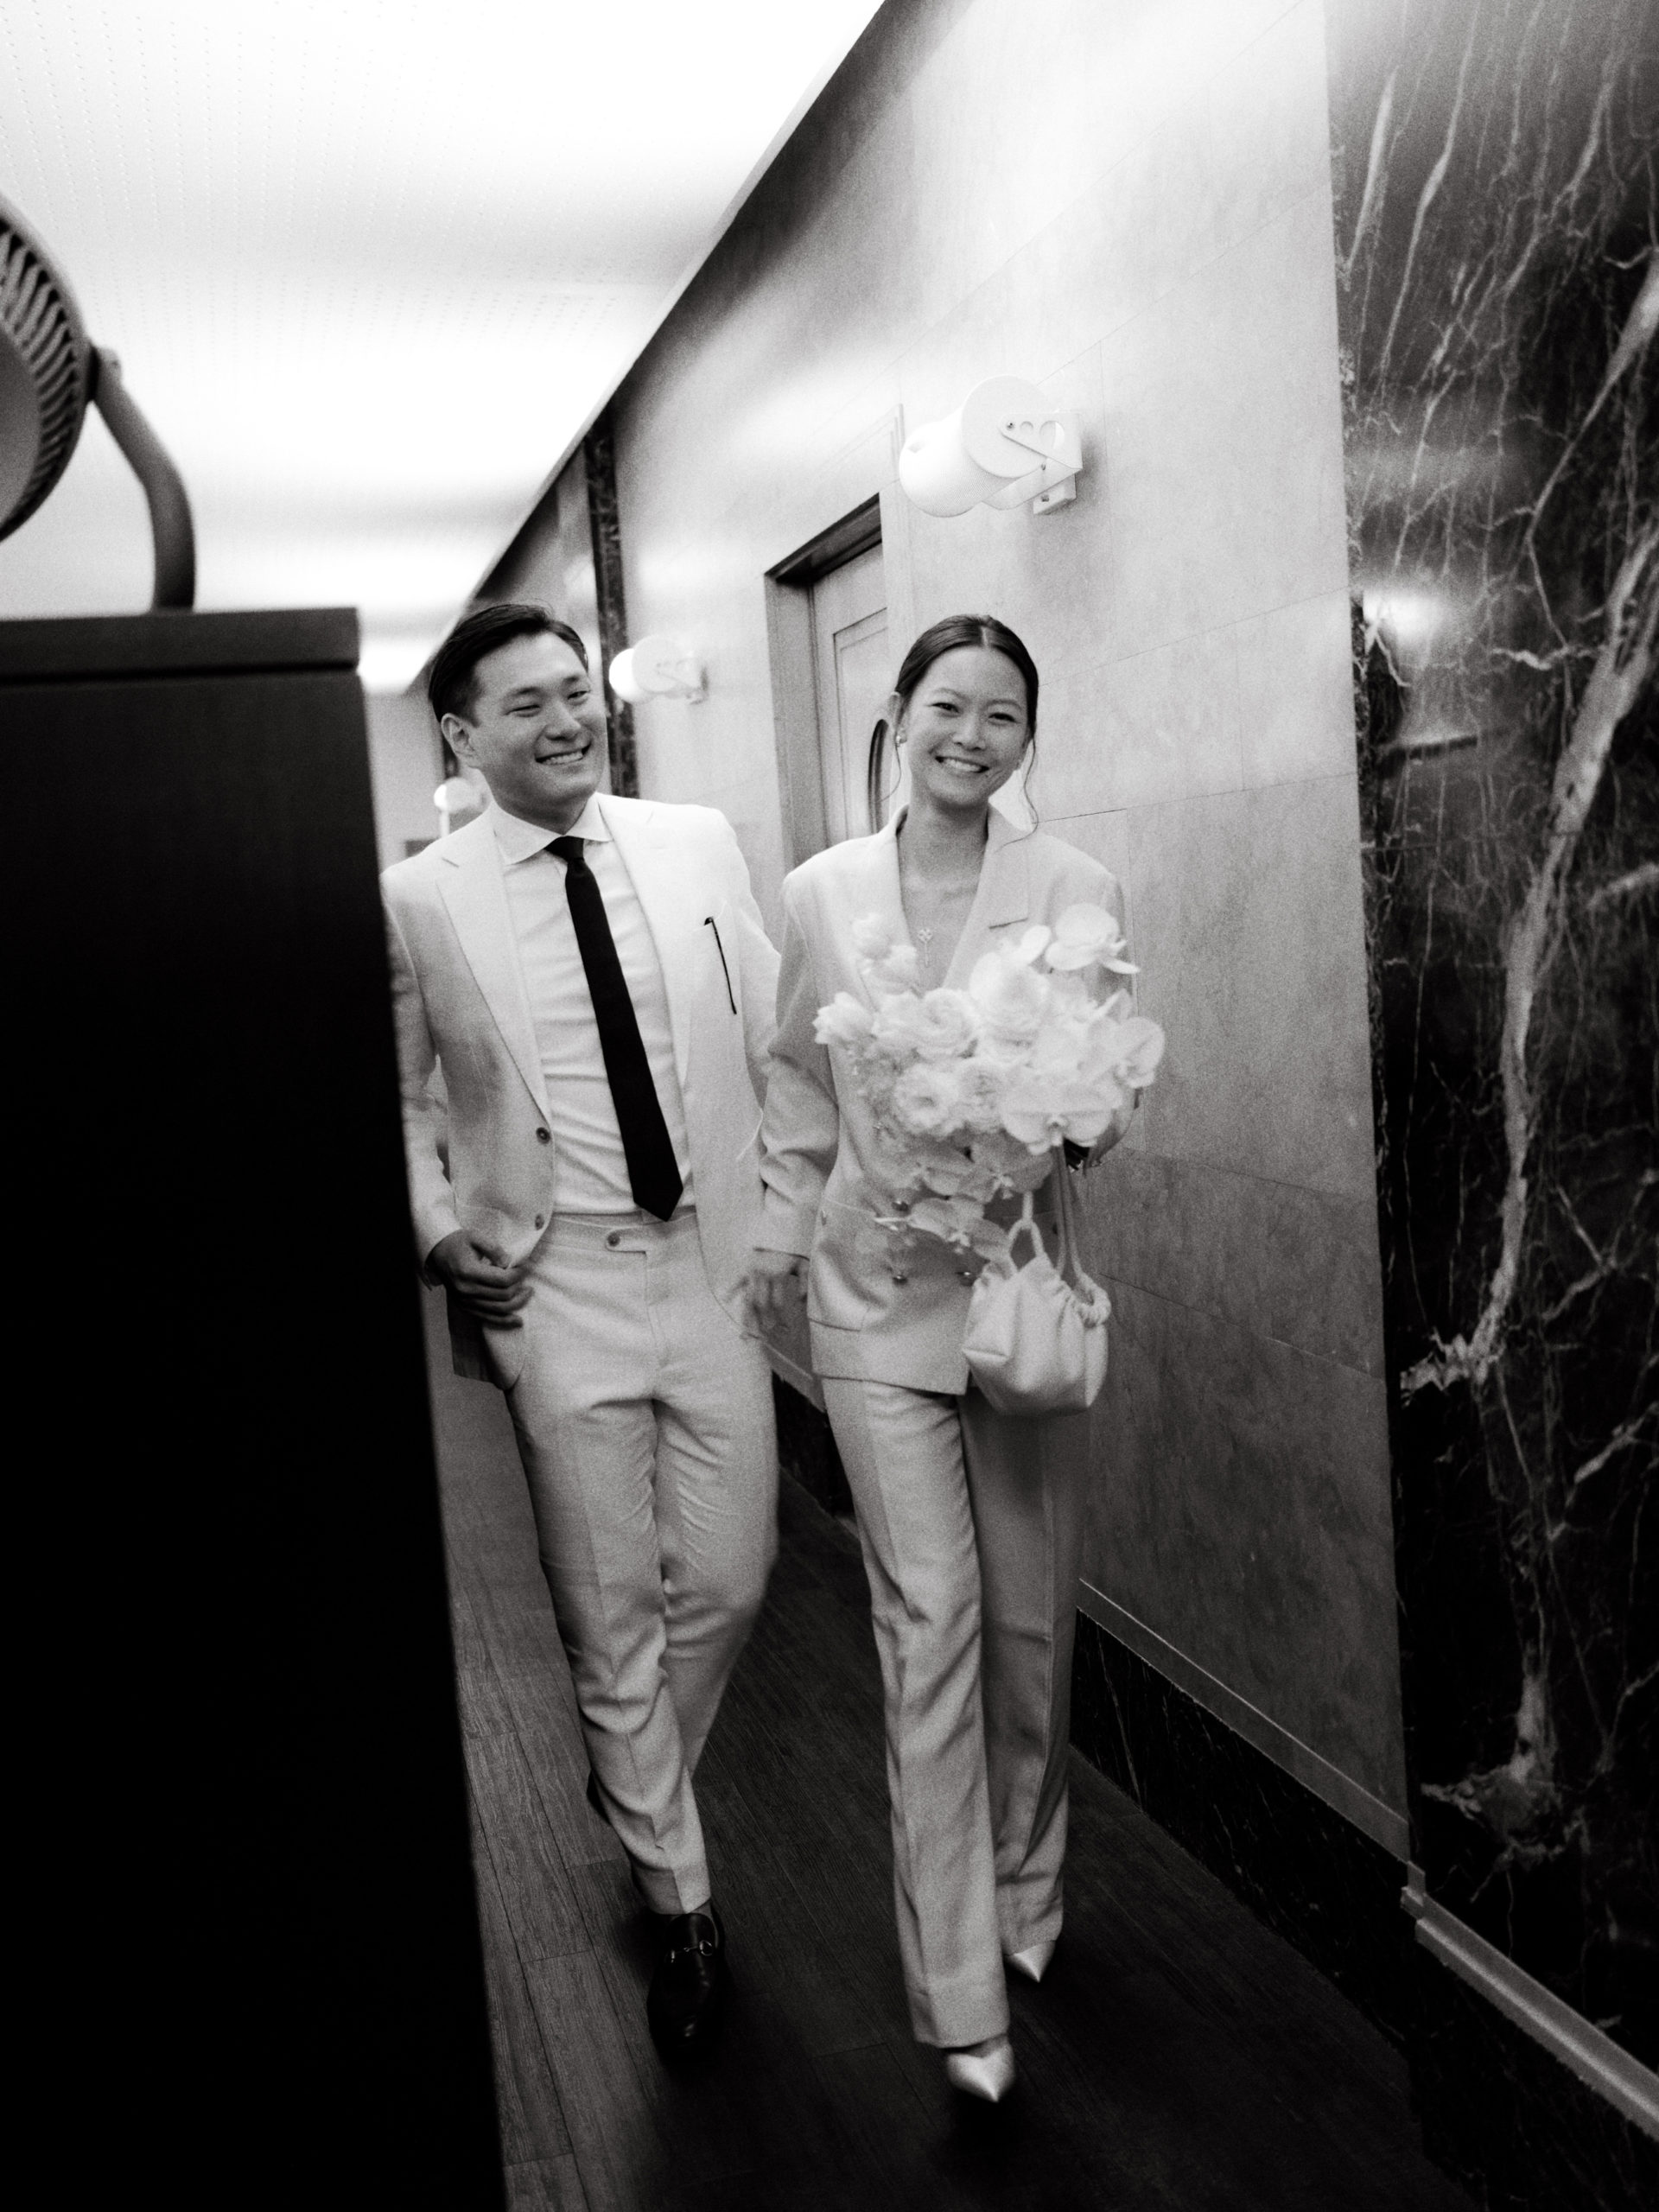 The newlyweds are walking in the hallway going to the exit door of NYC Marriage Bureau. Personalized NYC City Hall wedding image by Jenny Fu Studio